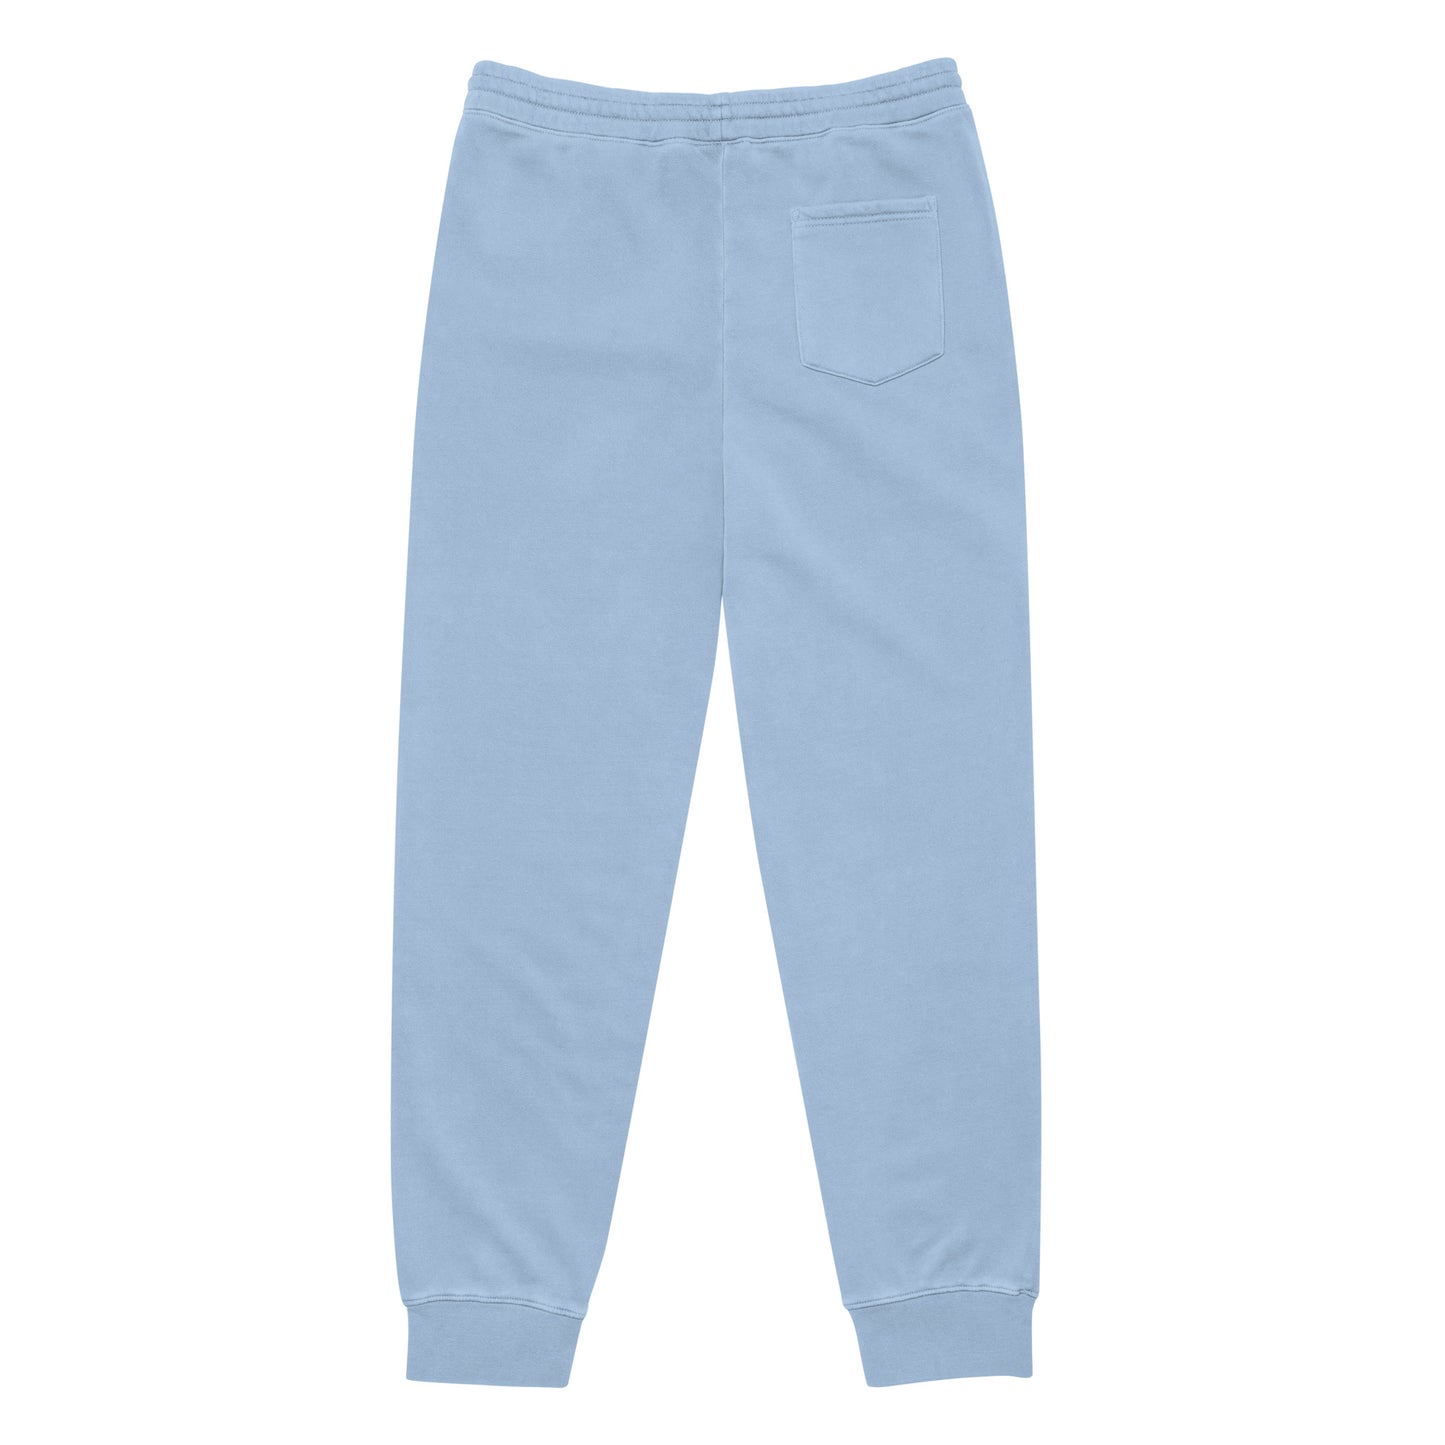 dirty hippie pigment-dyed sweatpants